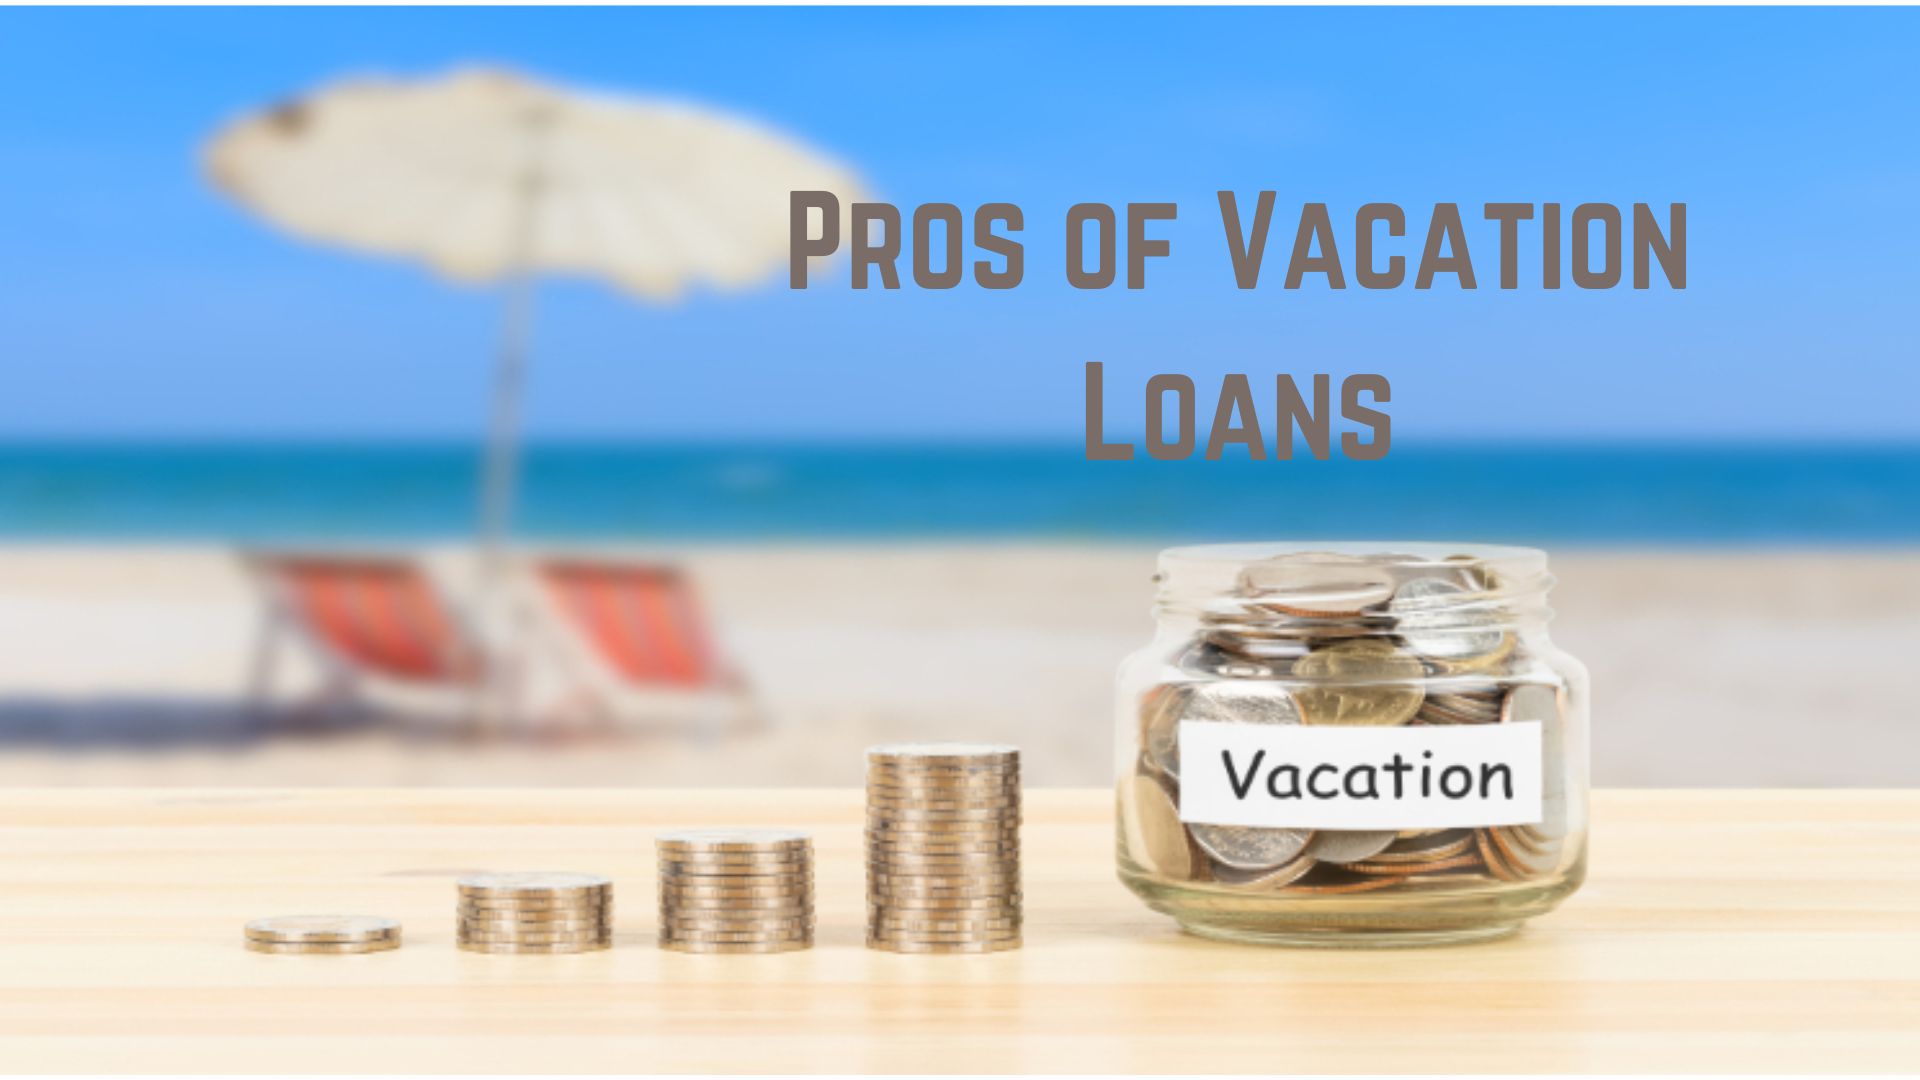 Pros of Vacation Loans